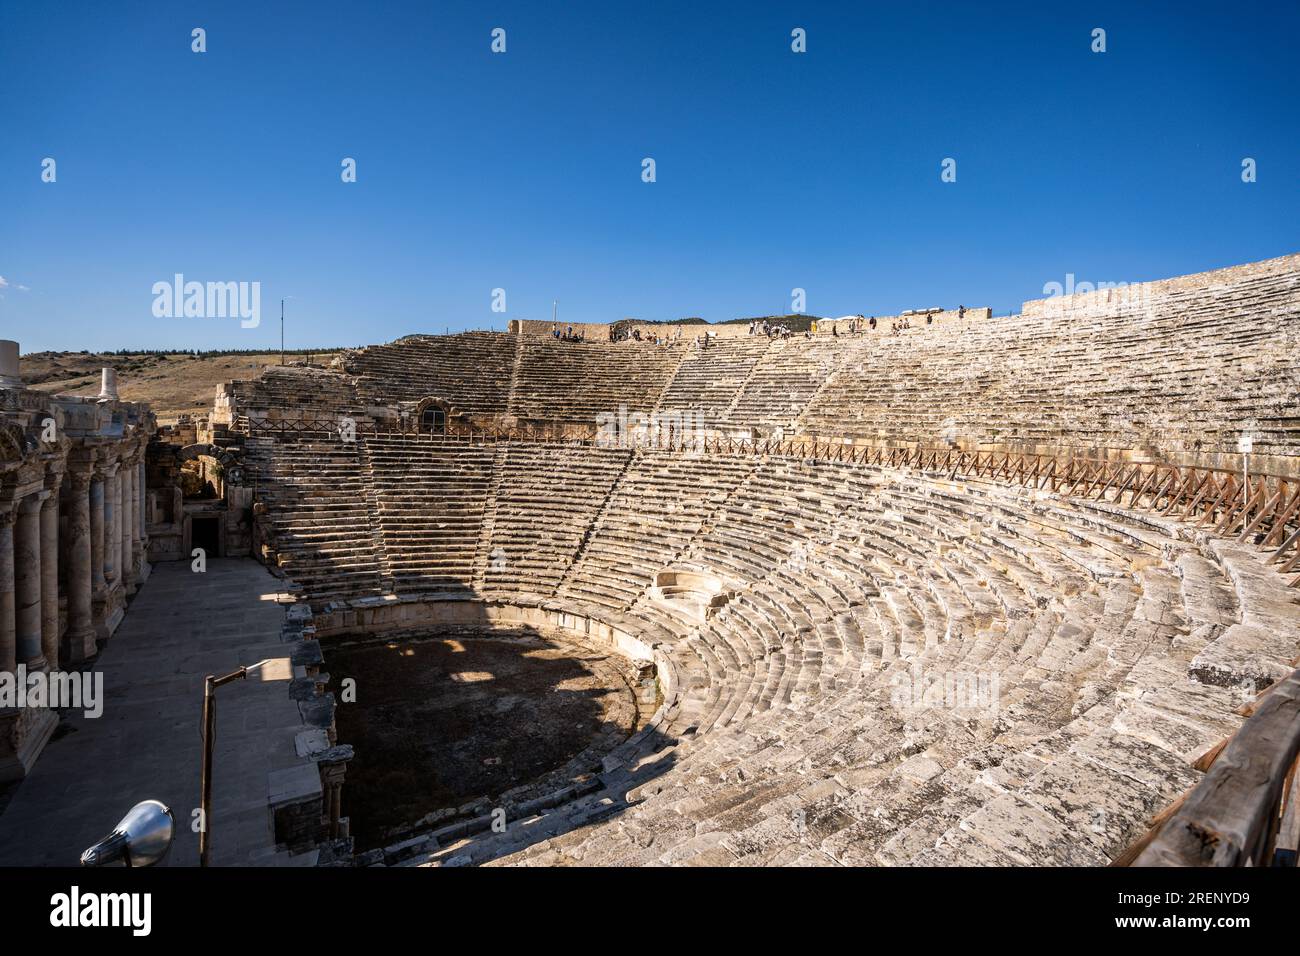 Pamukkale, Hierapolis Pamukkale Archeological Site (UNESCO Site), Natural Travertine Thermal Pools. Ruins of ancient city of old amphitheater. Stock Photo